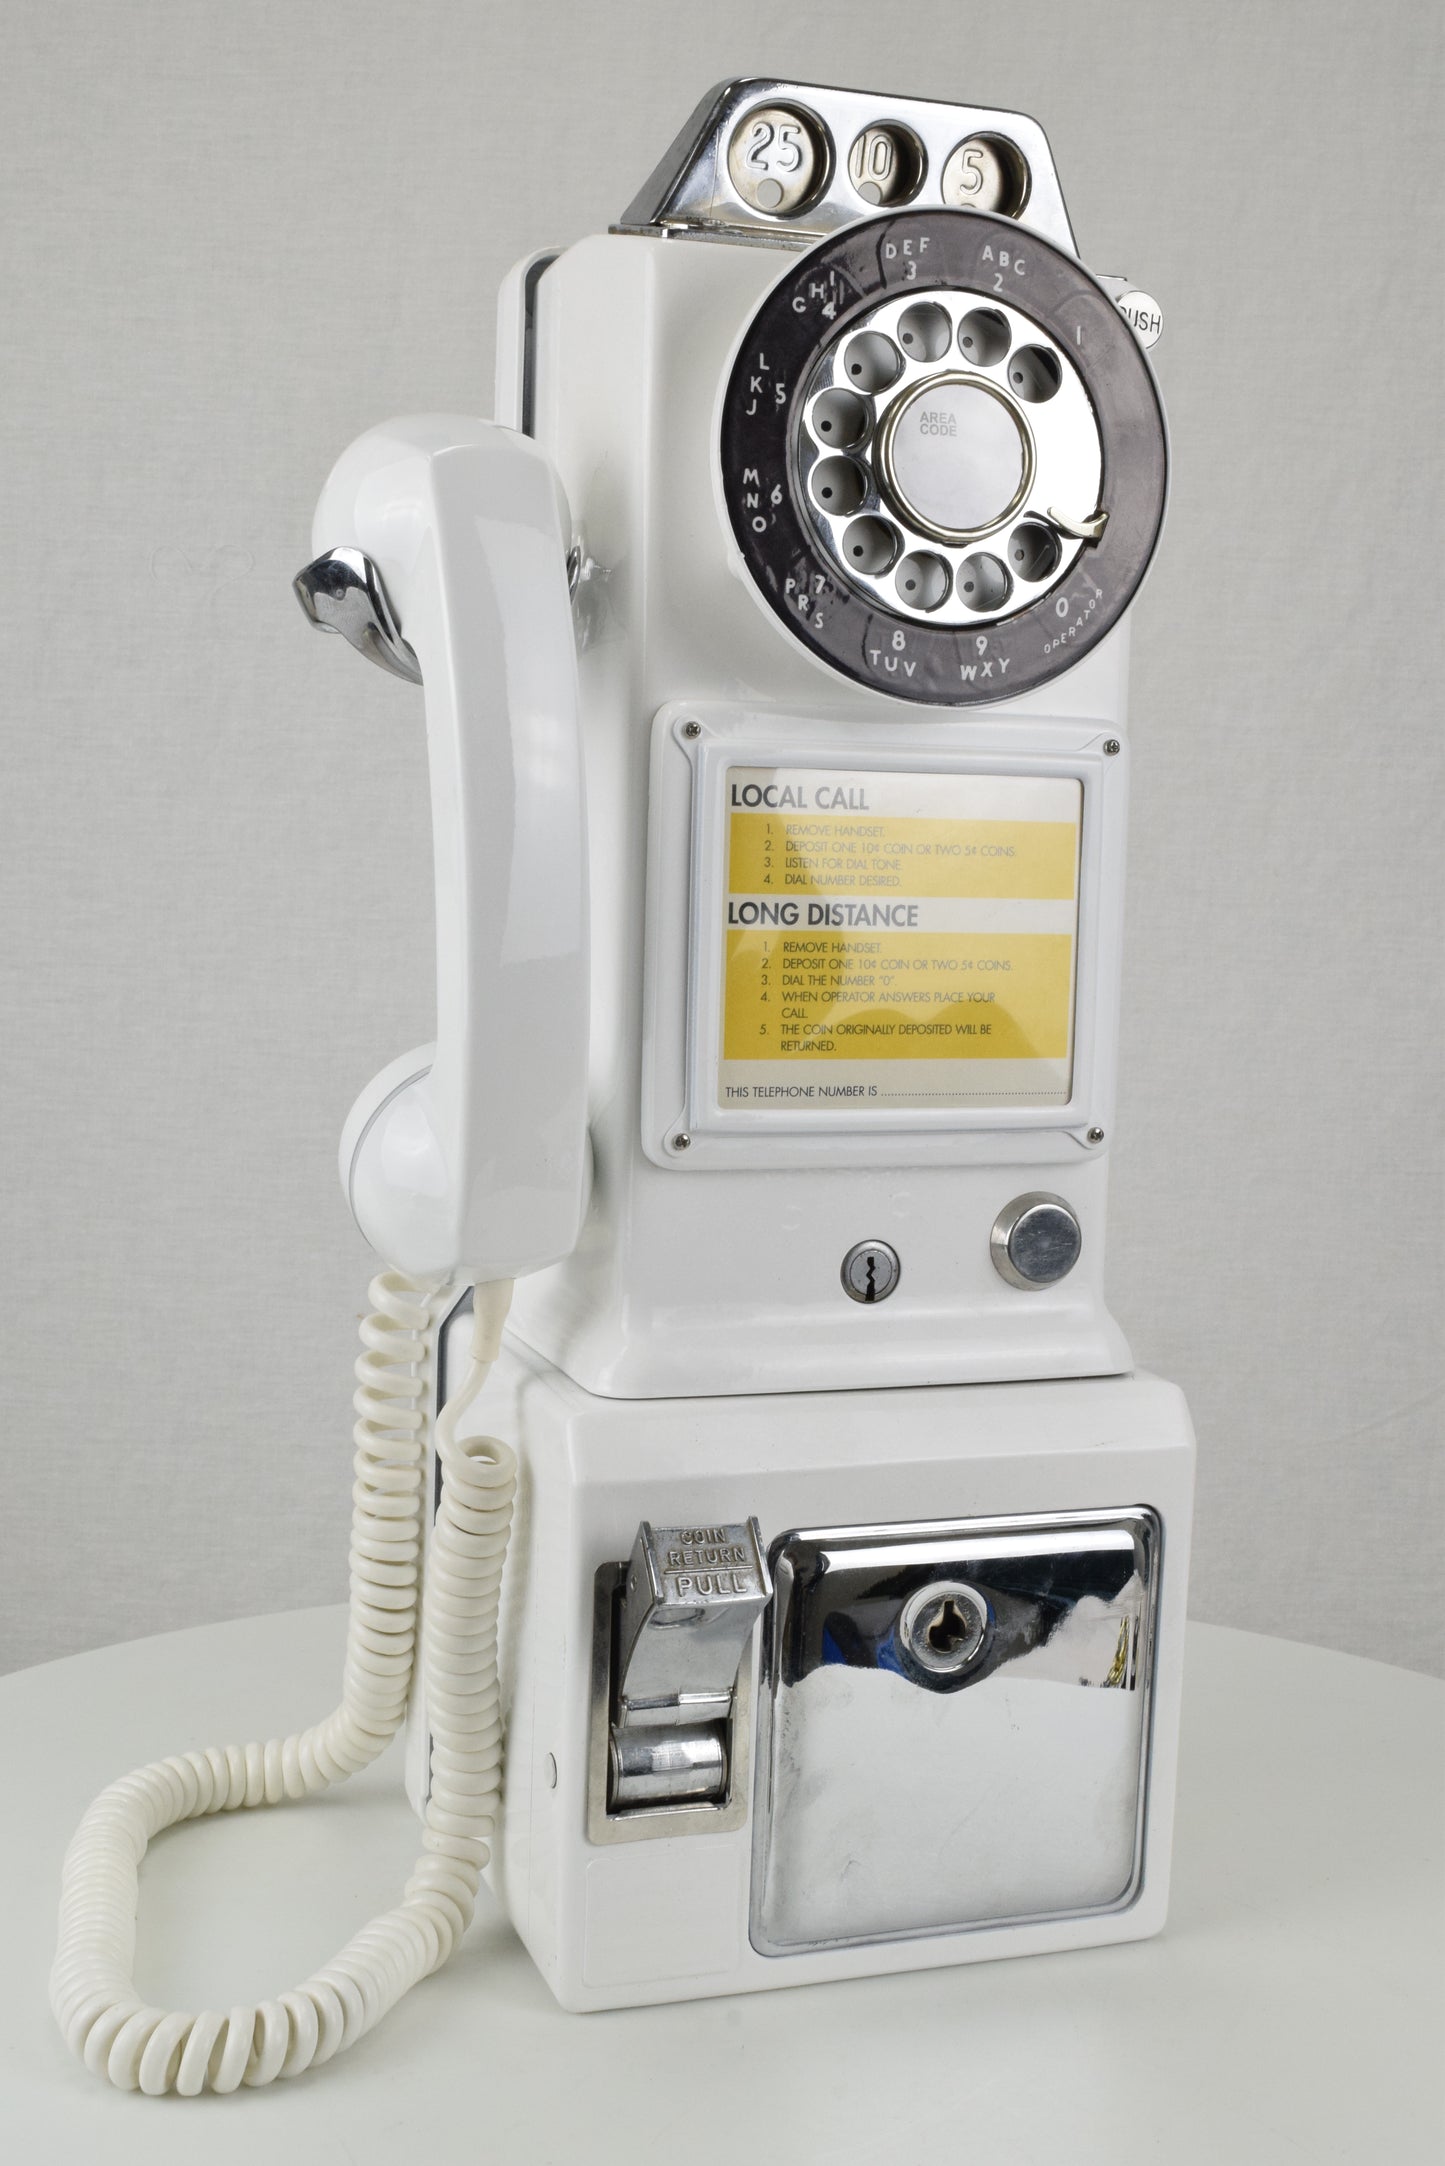 Northern or Western Electric - 233 - White Payphone